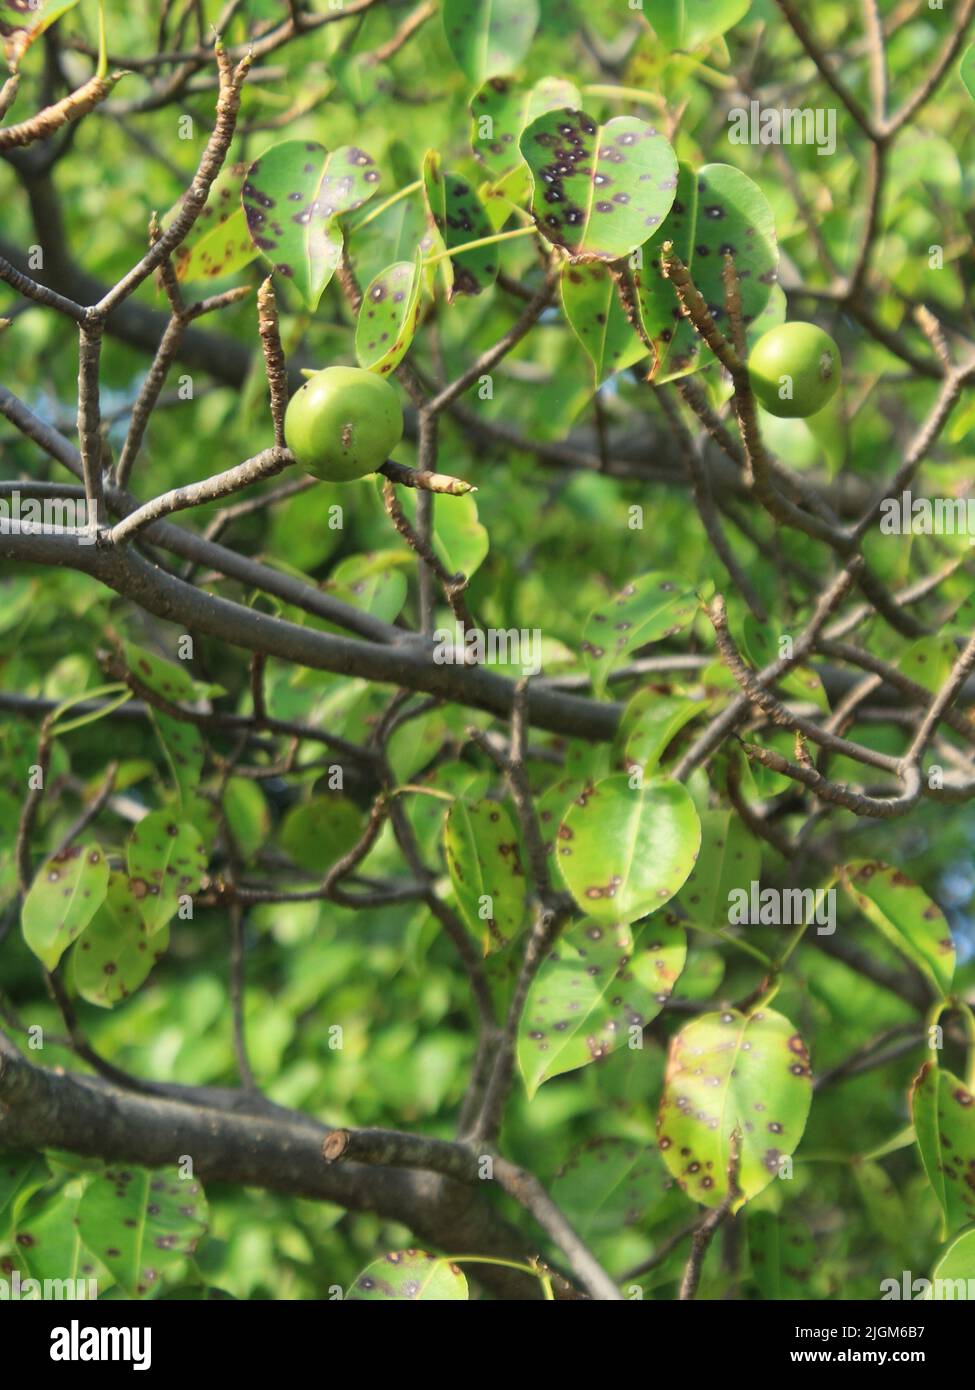 Fruits of manchineel tree (Hippomanne mancinella) from the beaches of Costa Rica Stock Photo